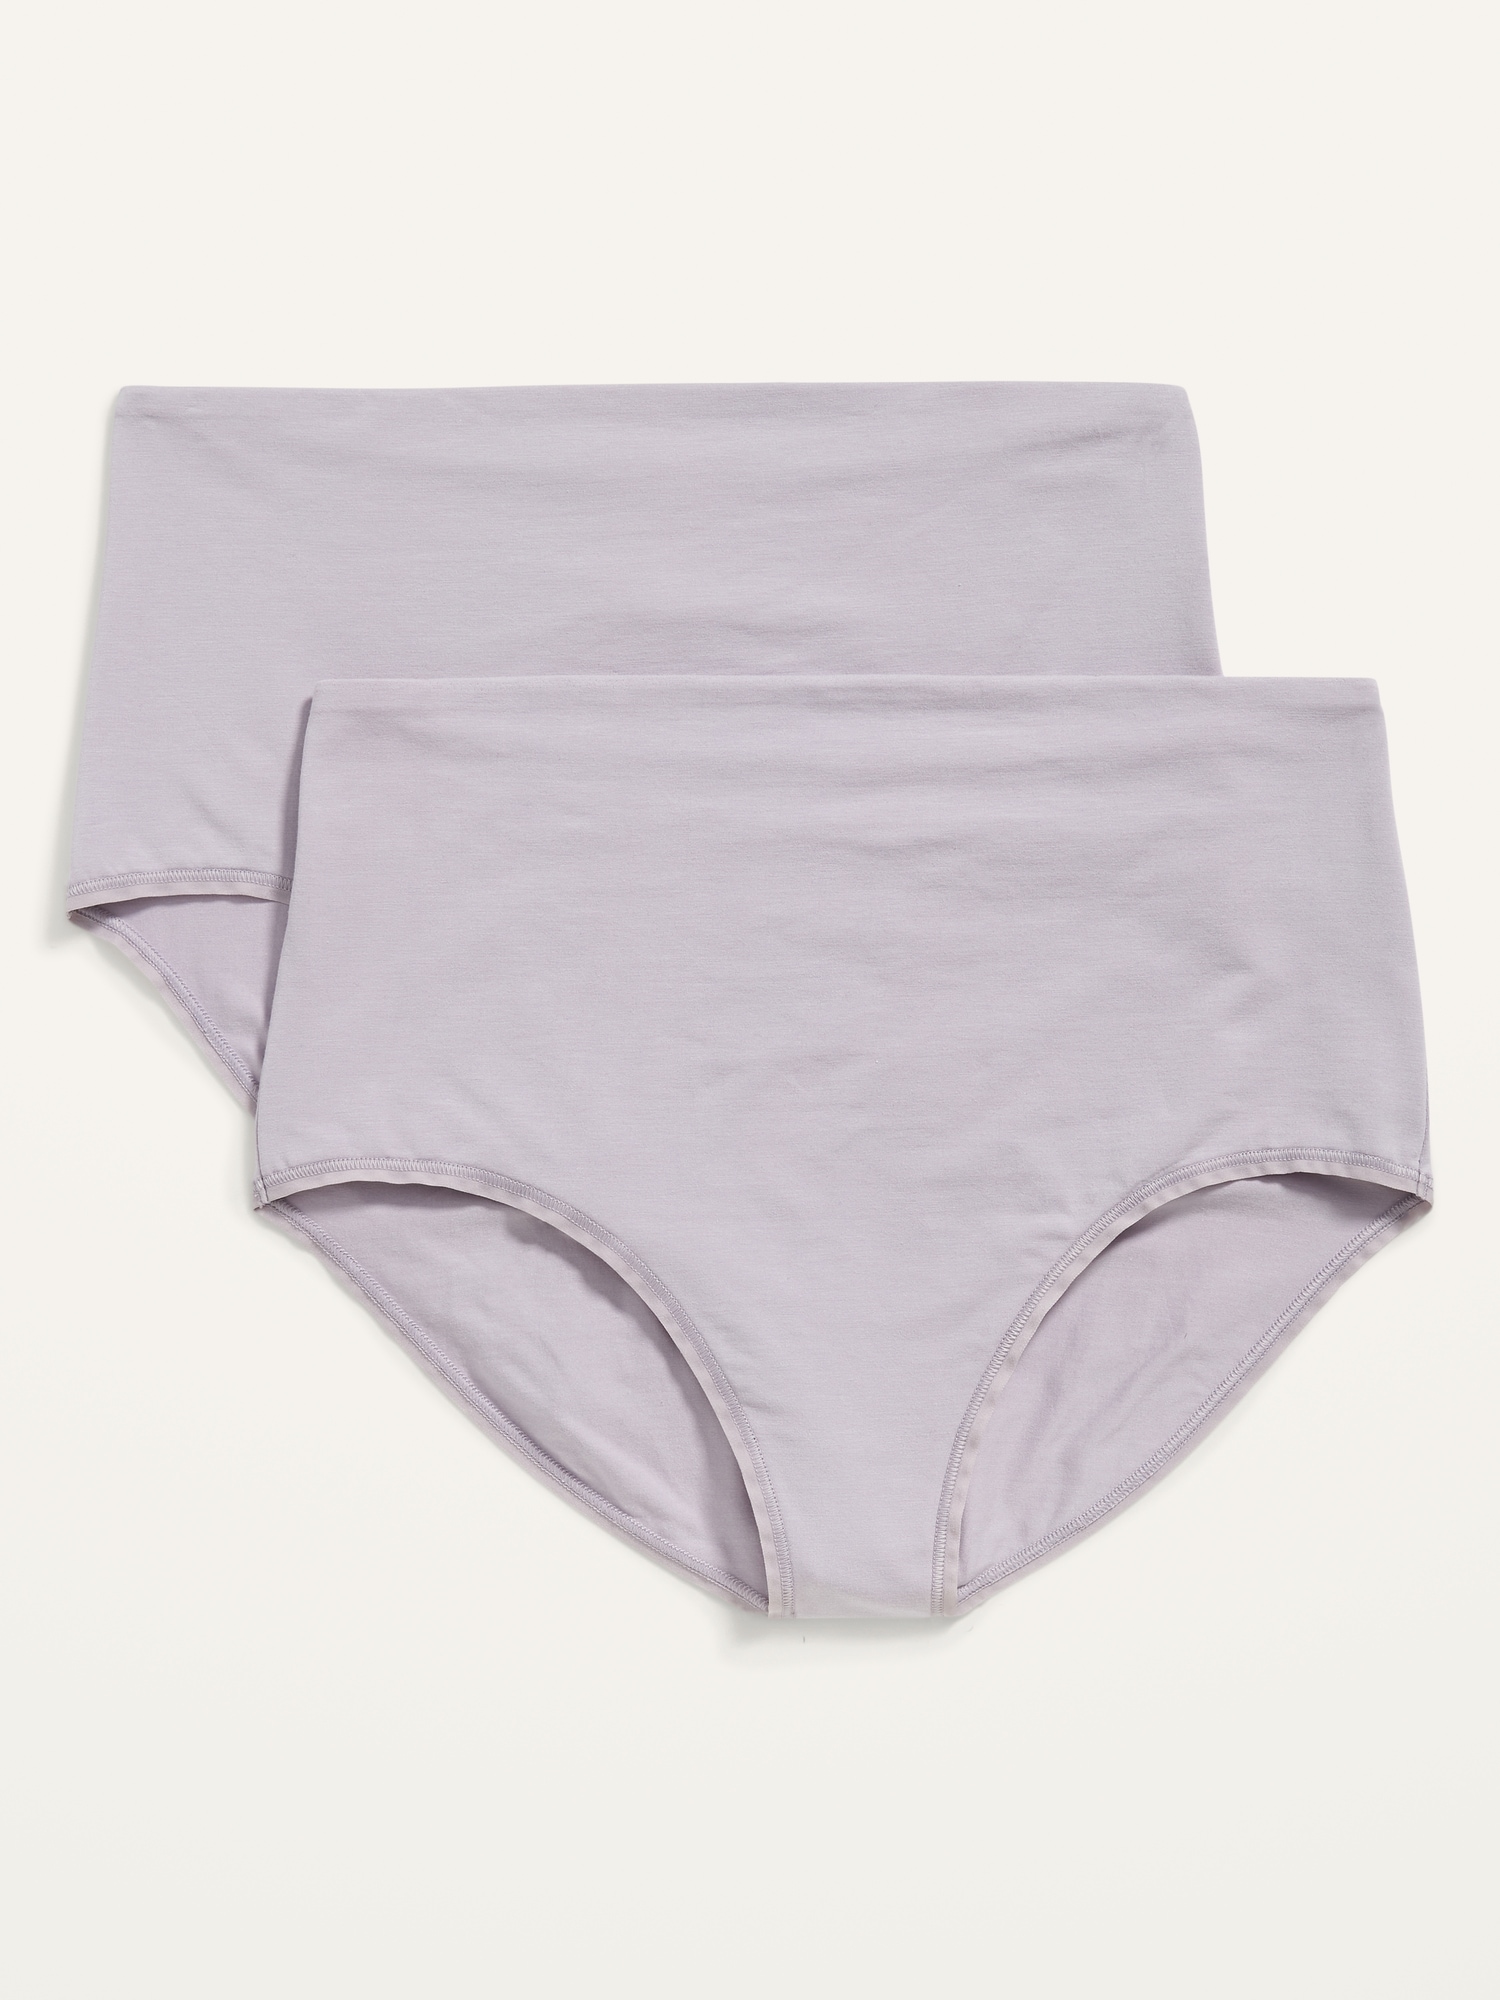 Over Bump High Waisted Maternity Knickers– Curvypower